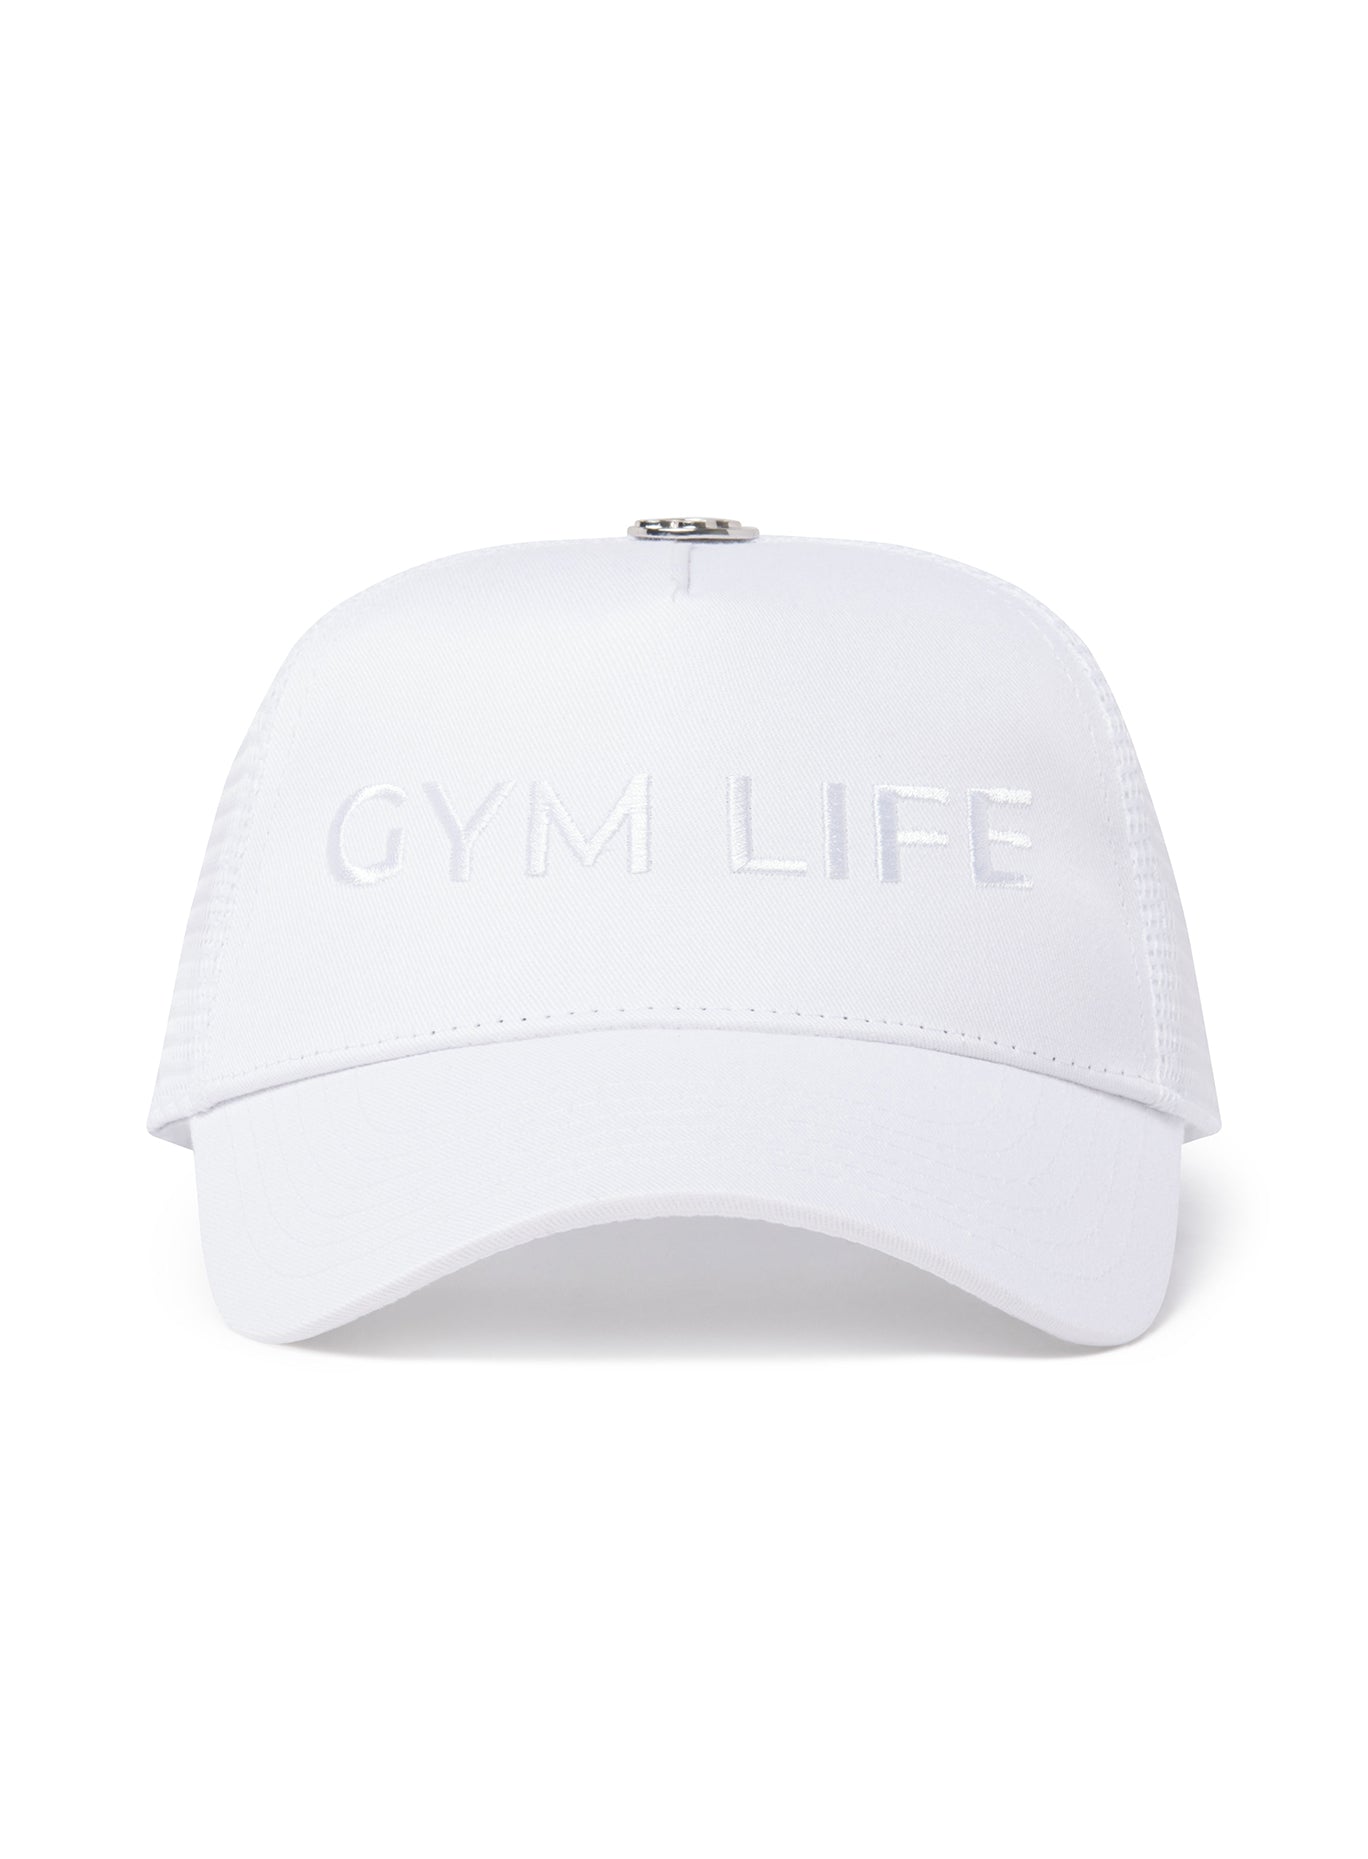 Front view of our gym life hat 